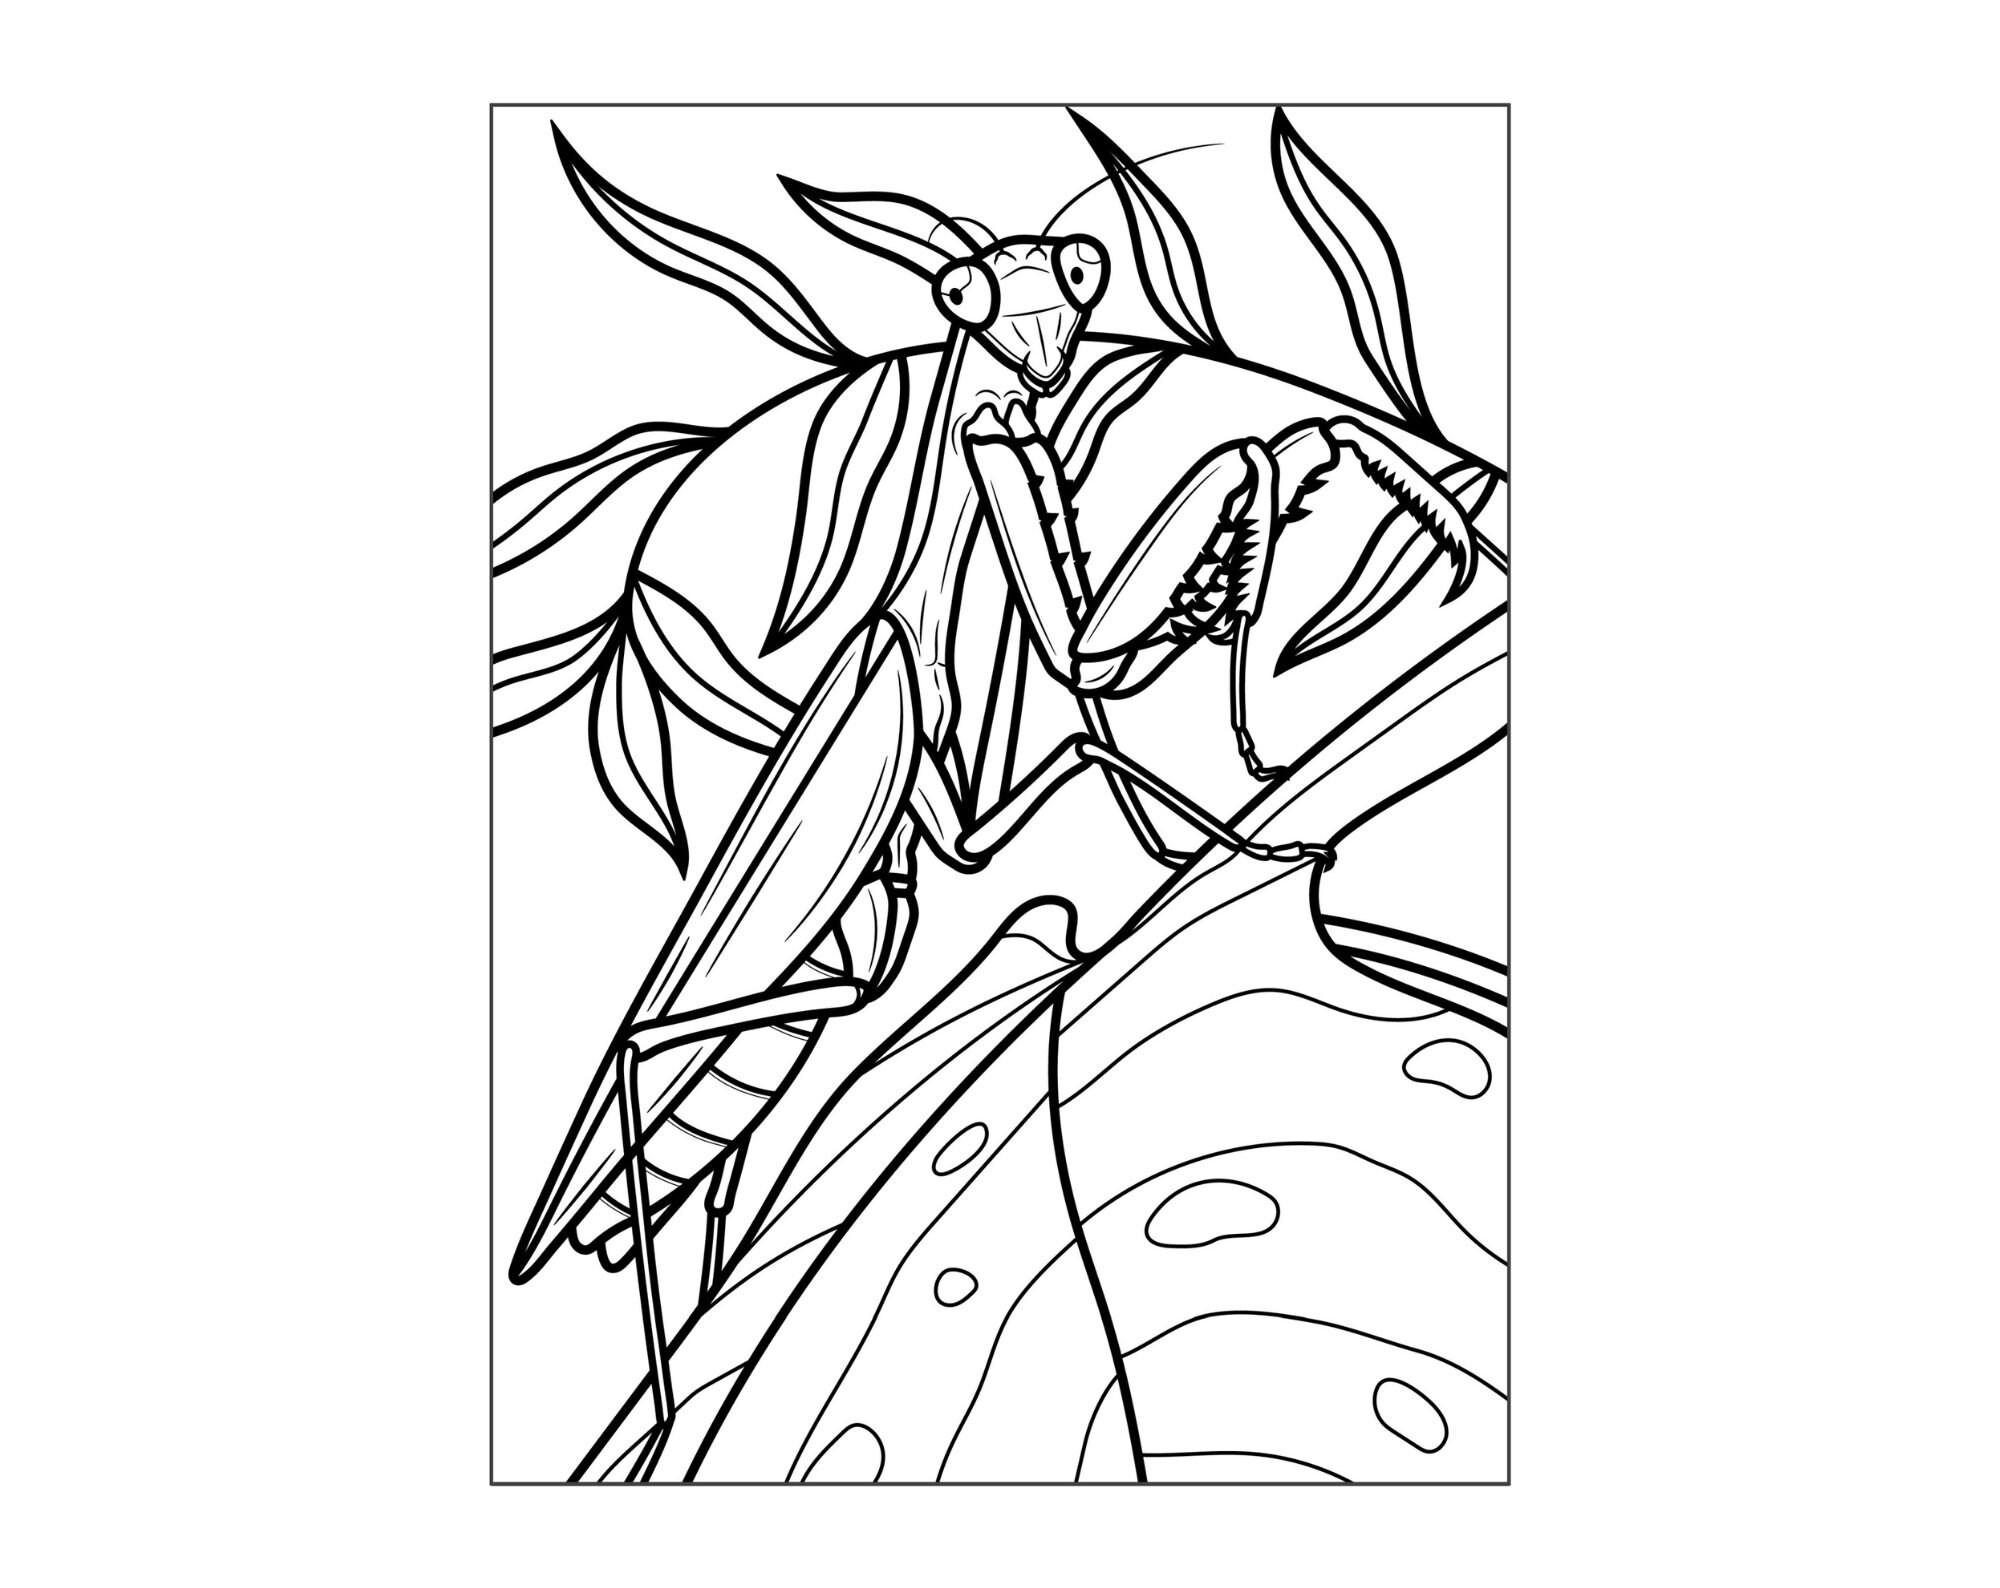 X kids insect coloring poster manny the praying mantis child diy wall art kids coloring activity